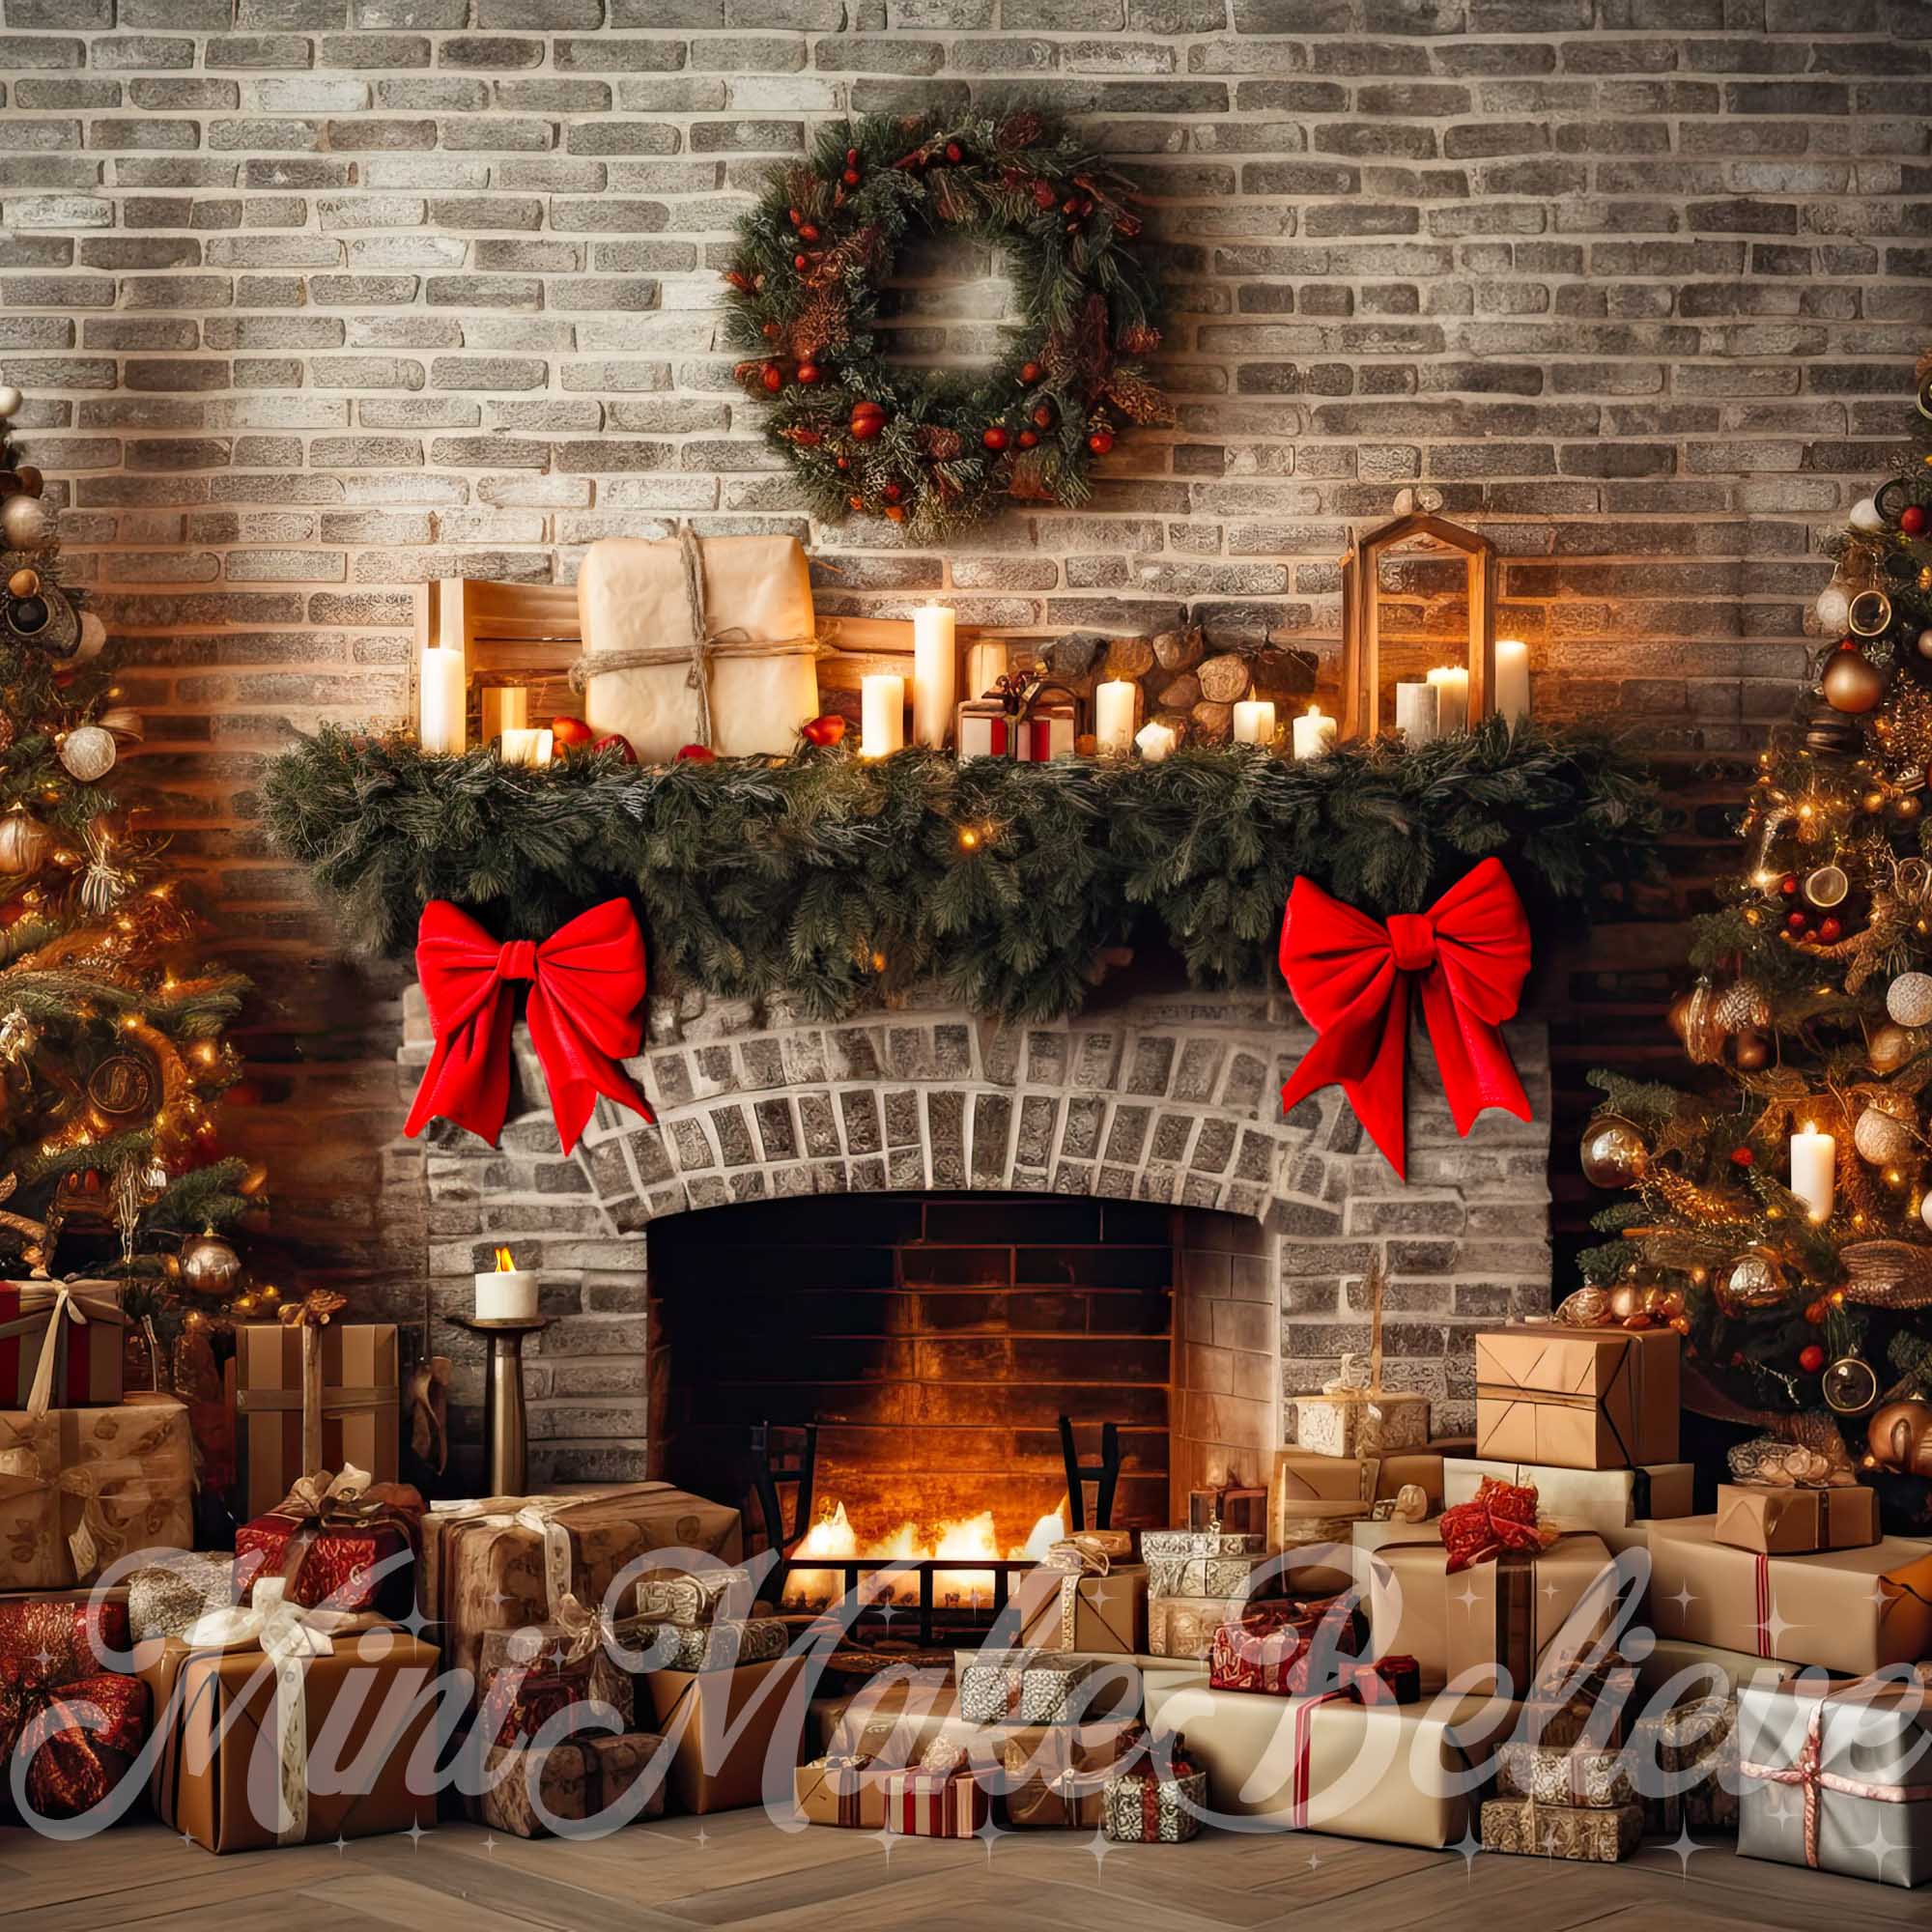 Kate Christmas Rustic Brick Fireplace and Trees Winter Fleece Backdrop Designed by Mini MakeBelieve